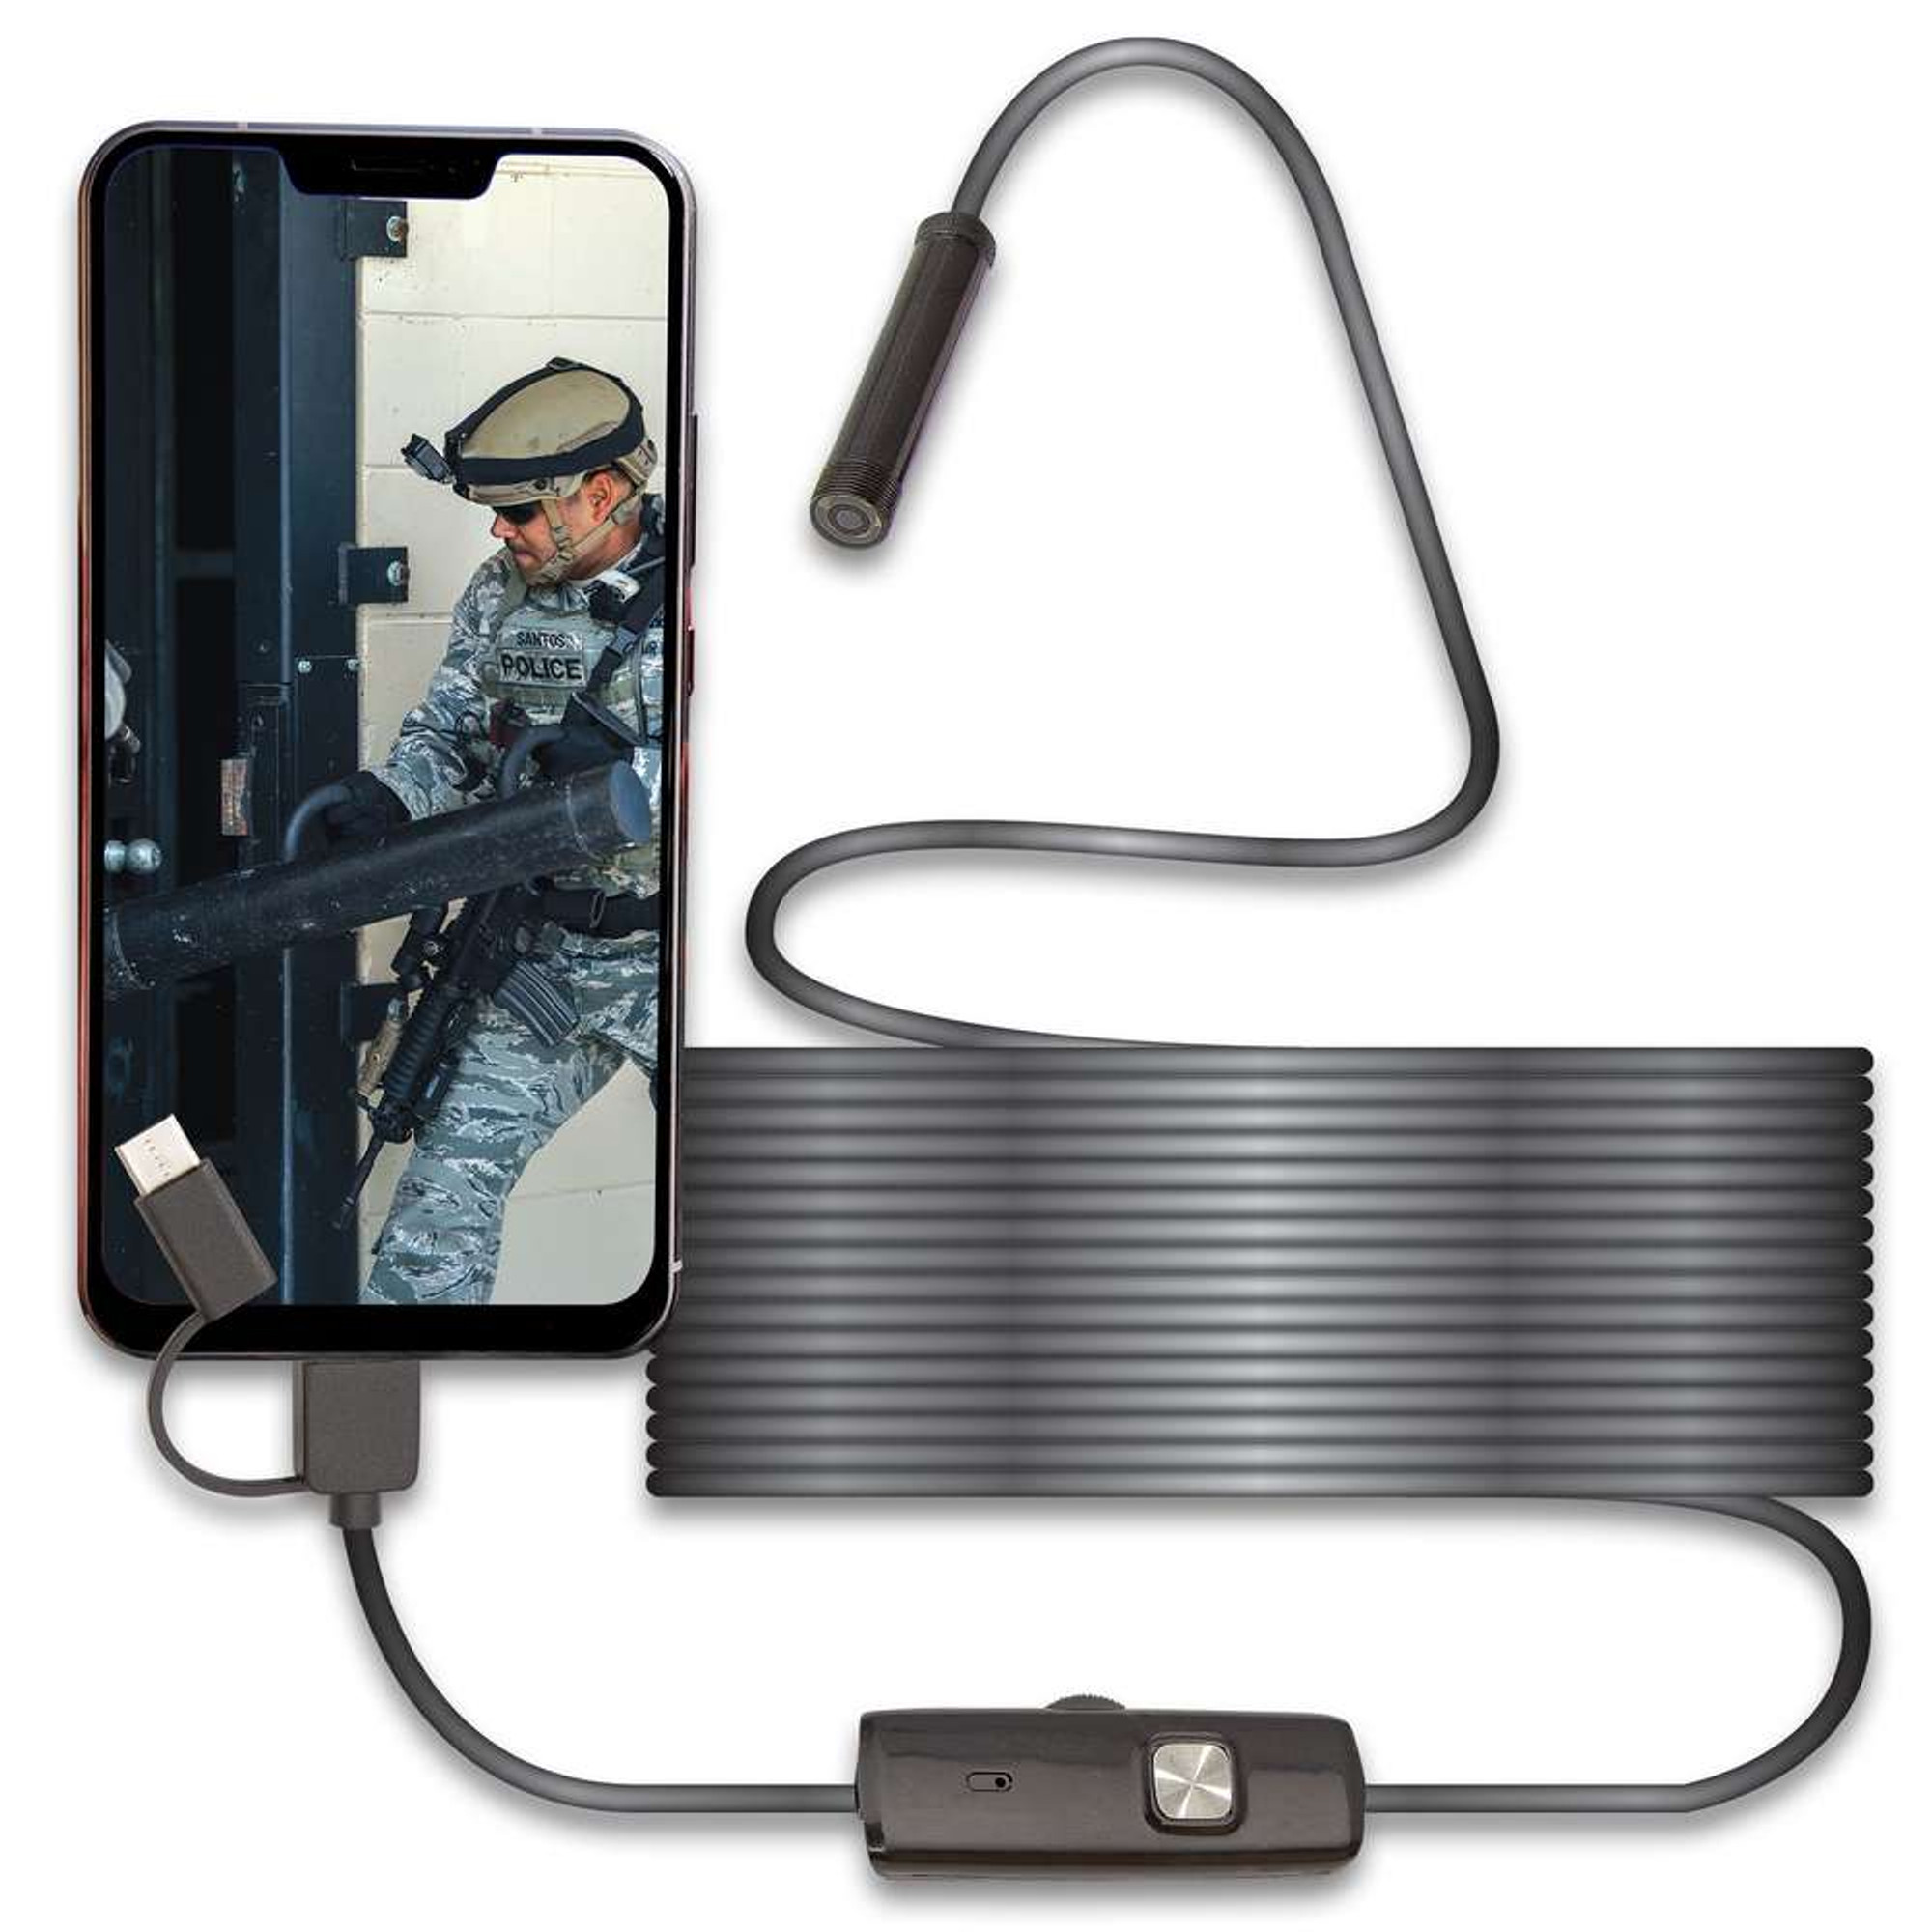 3-in-1 HD Tactical And Automotive Use Endoscope